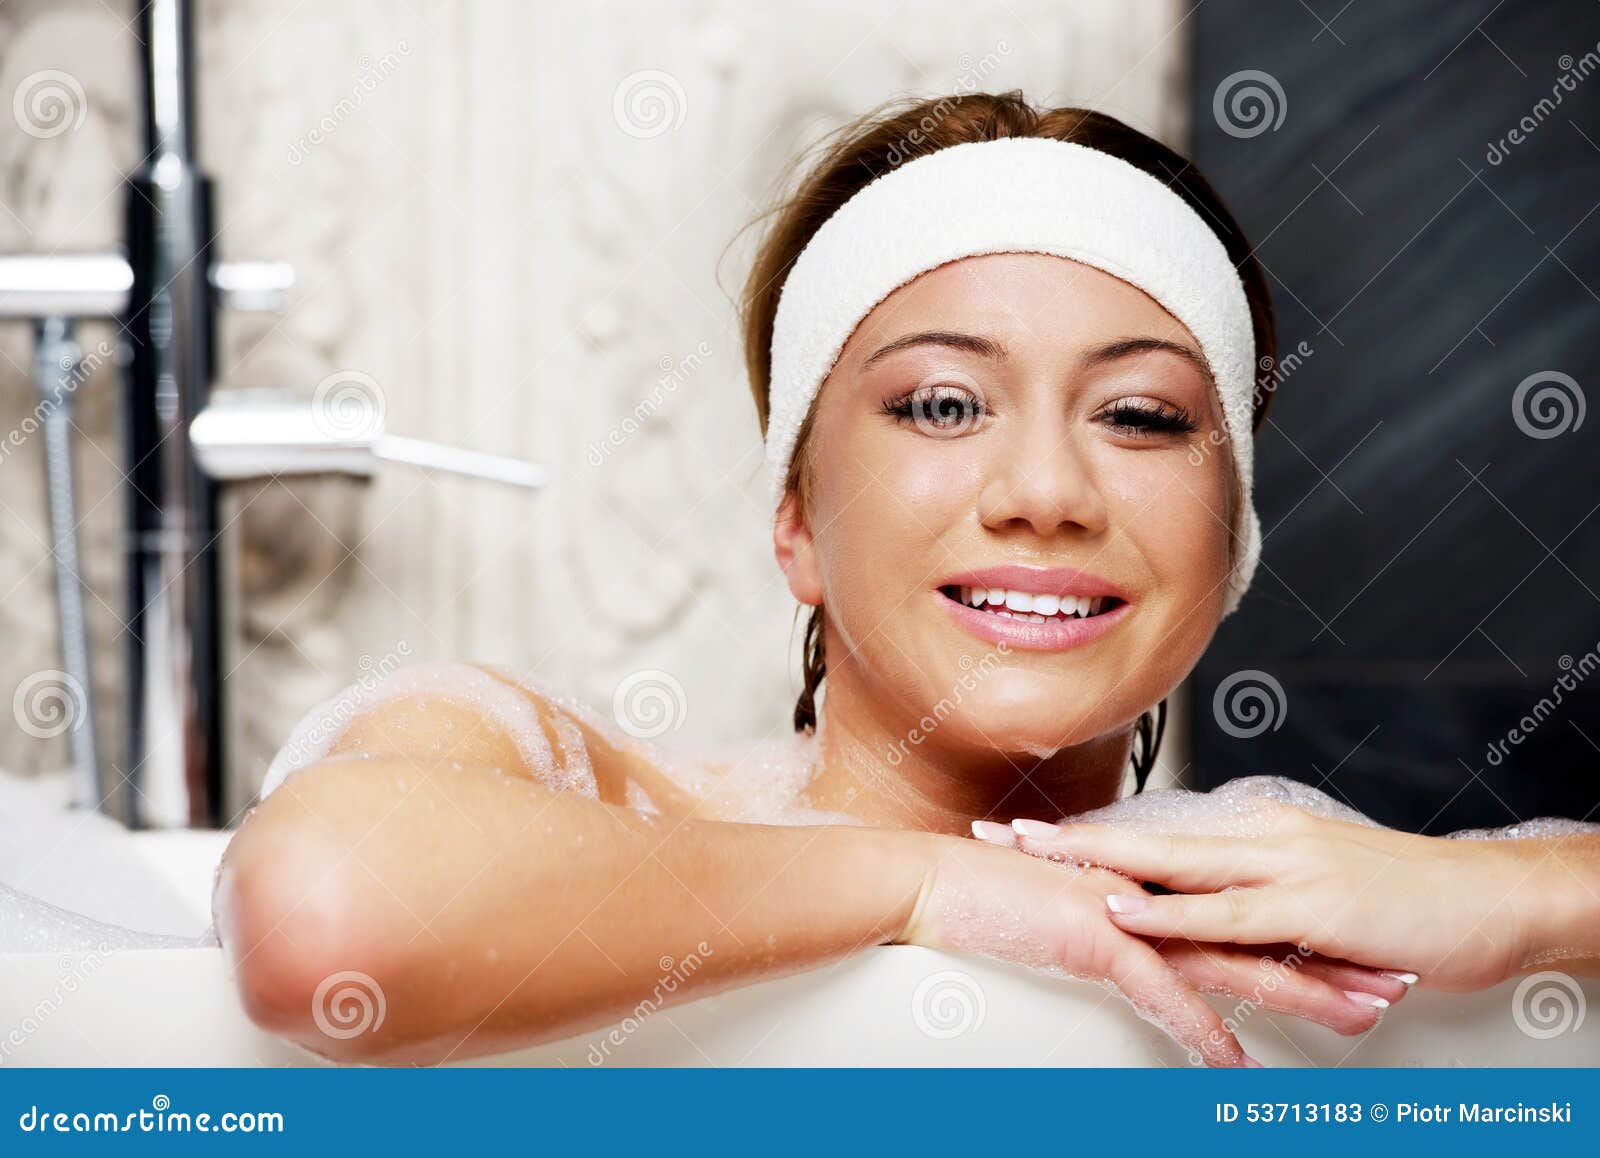 Bathing Woman Relaxing In Bath Stock Image Image Of Adult Relaxation 53713183 